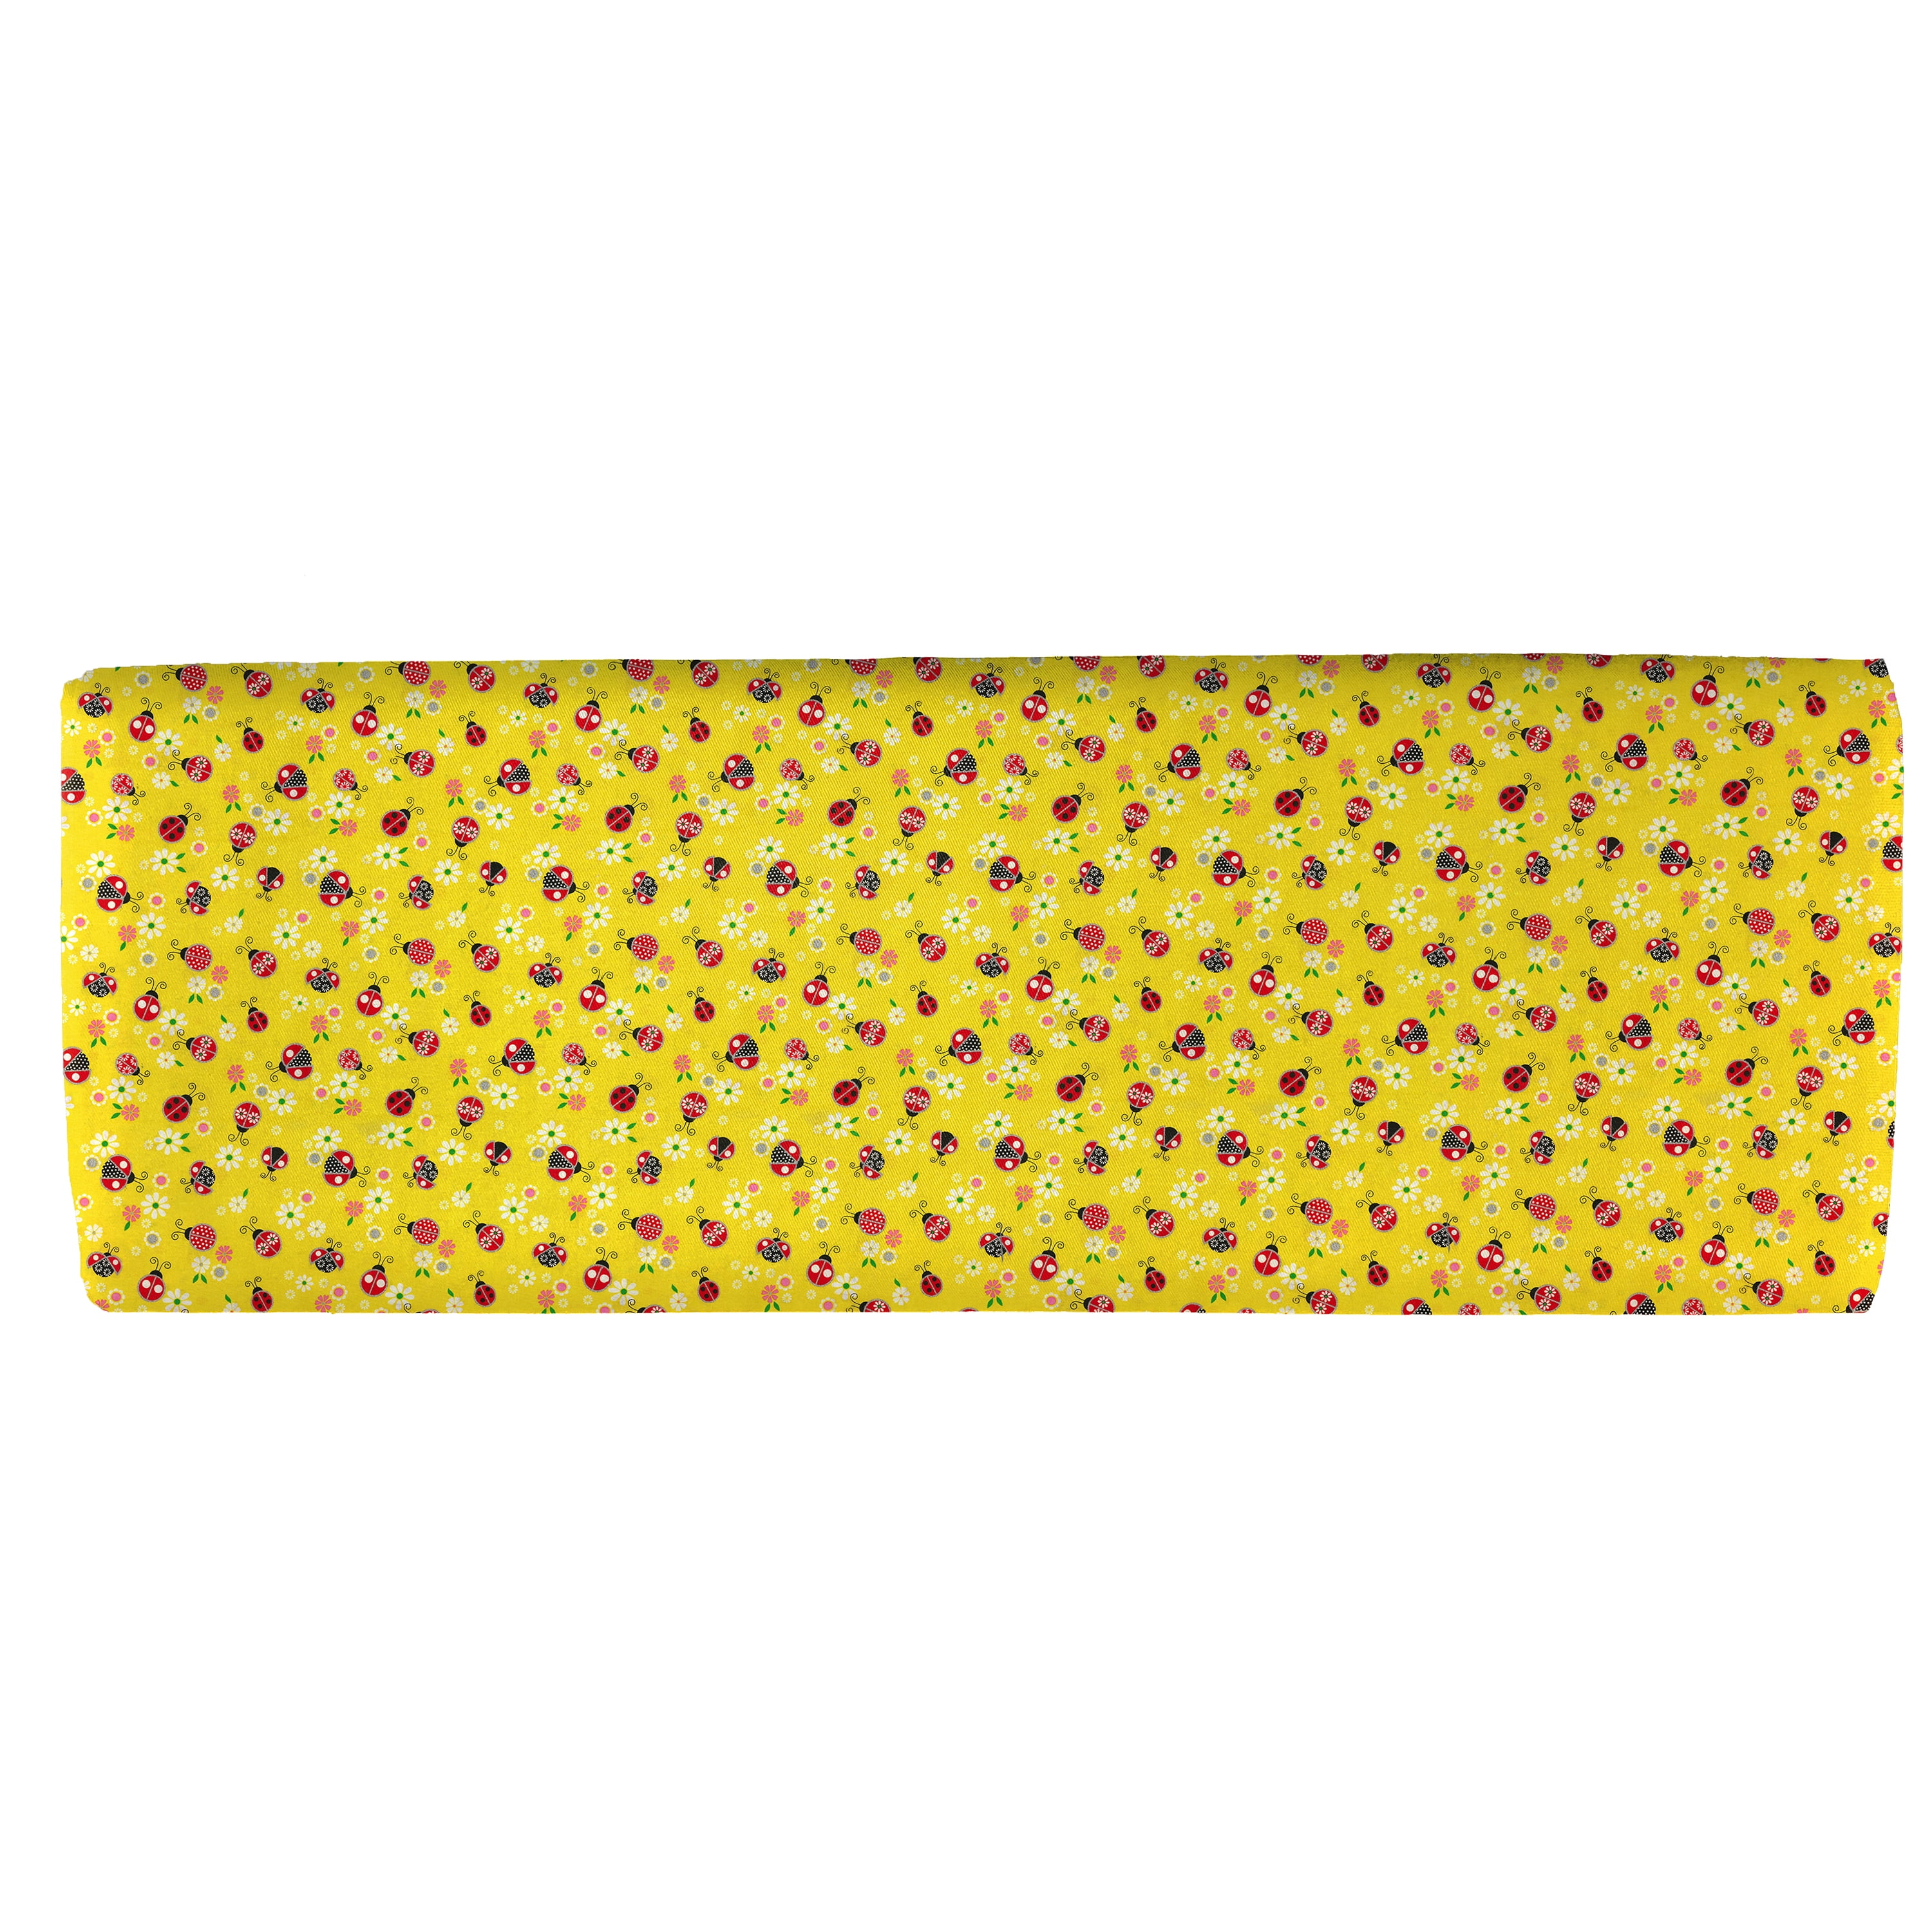 Tiny Dot Pure 100% Cotton Fabric Spot Dressmaking Quilting Pastel Yellow 